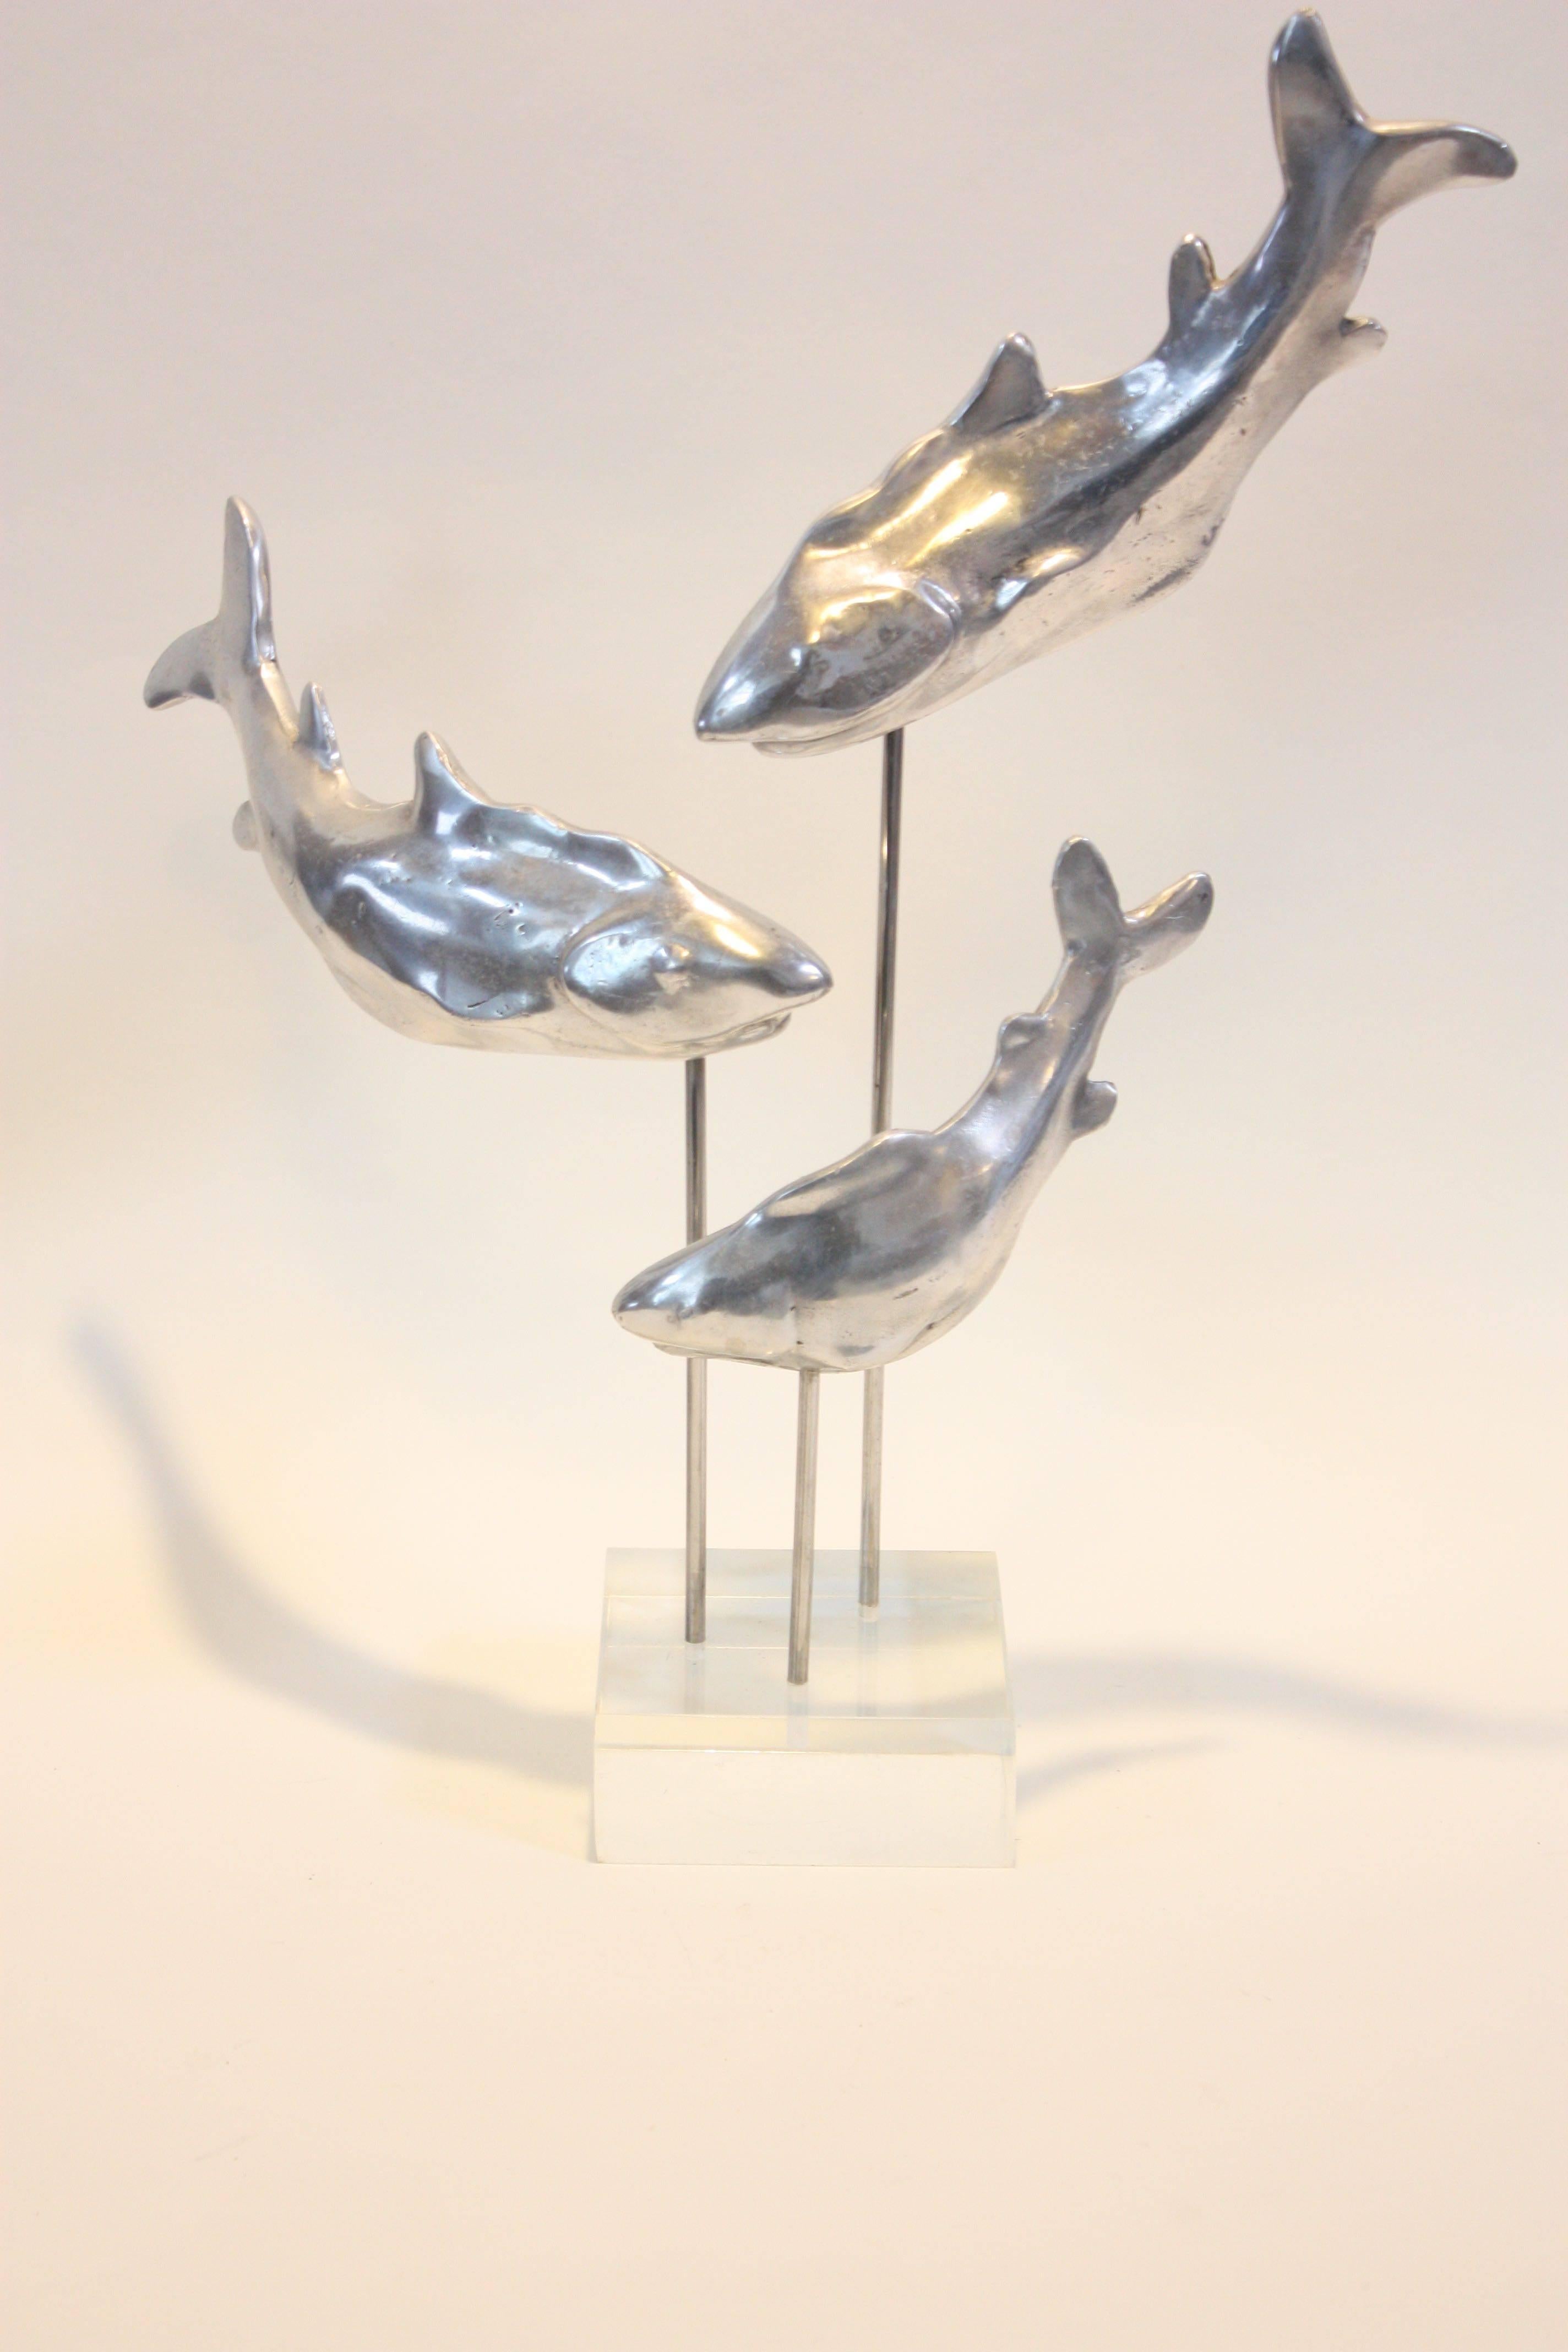 This unique sculpture is composed of three cast-aluminum sharks (representative of a family of sharks given the size disparity between the three) displayed in an ascending spiral formation on rods mounted onto a lucite base. The sharks can removed